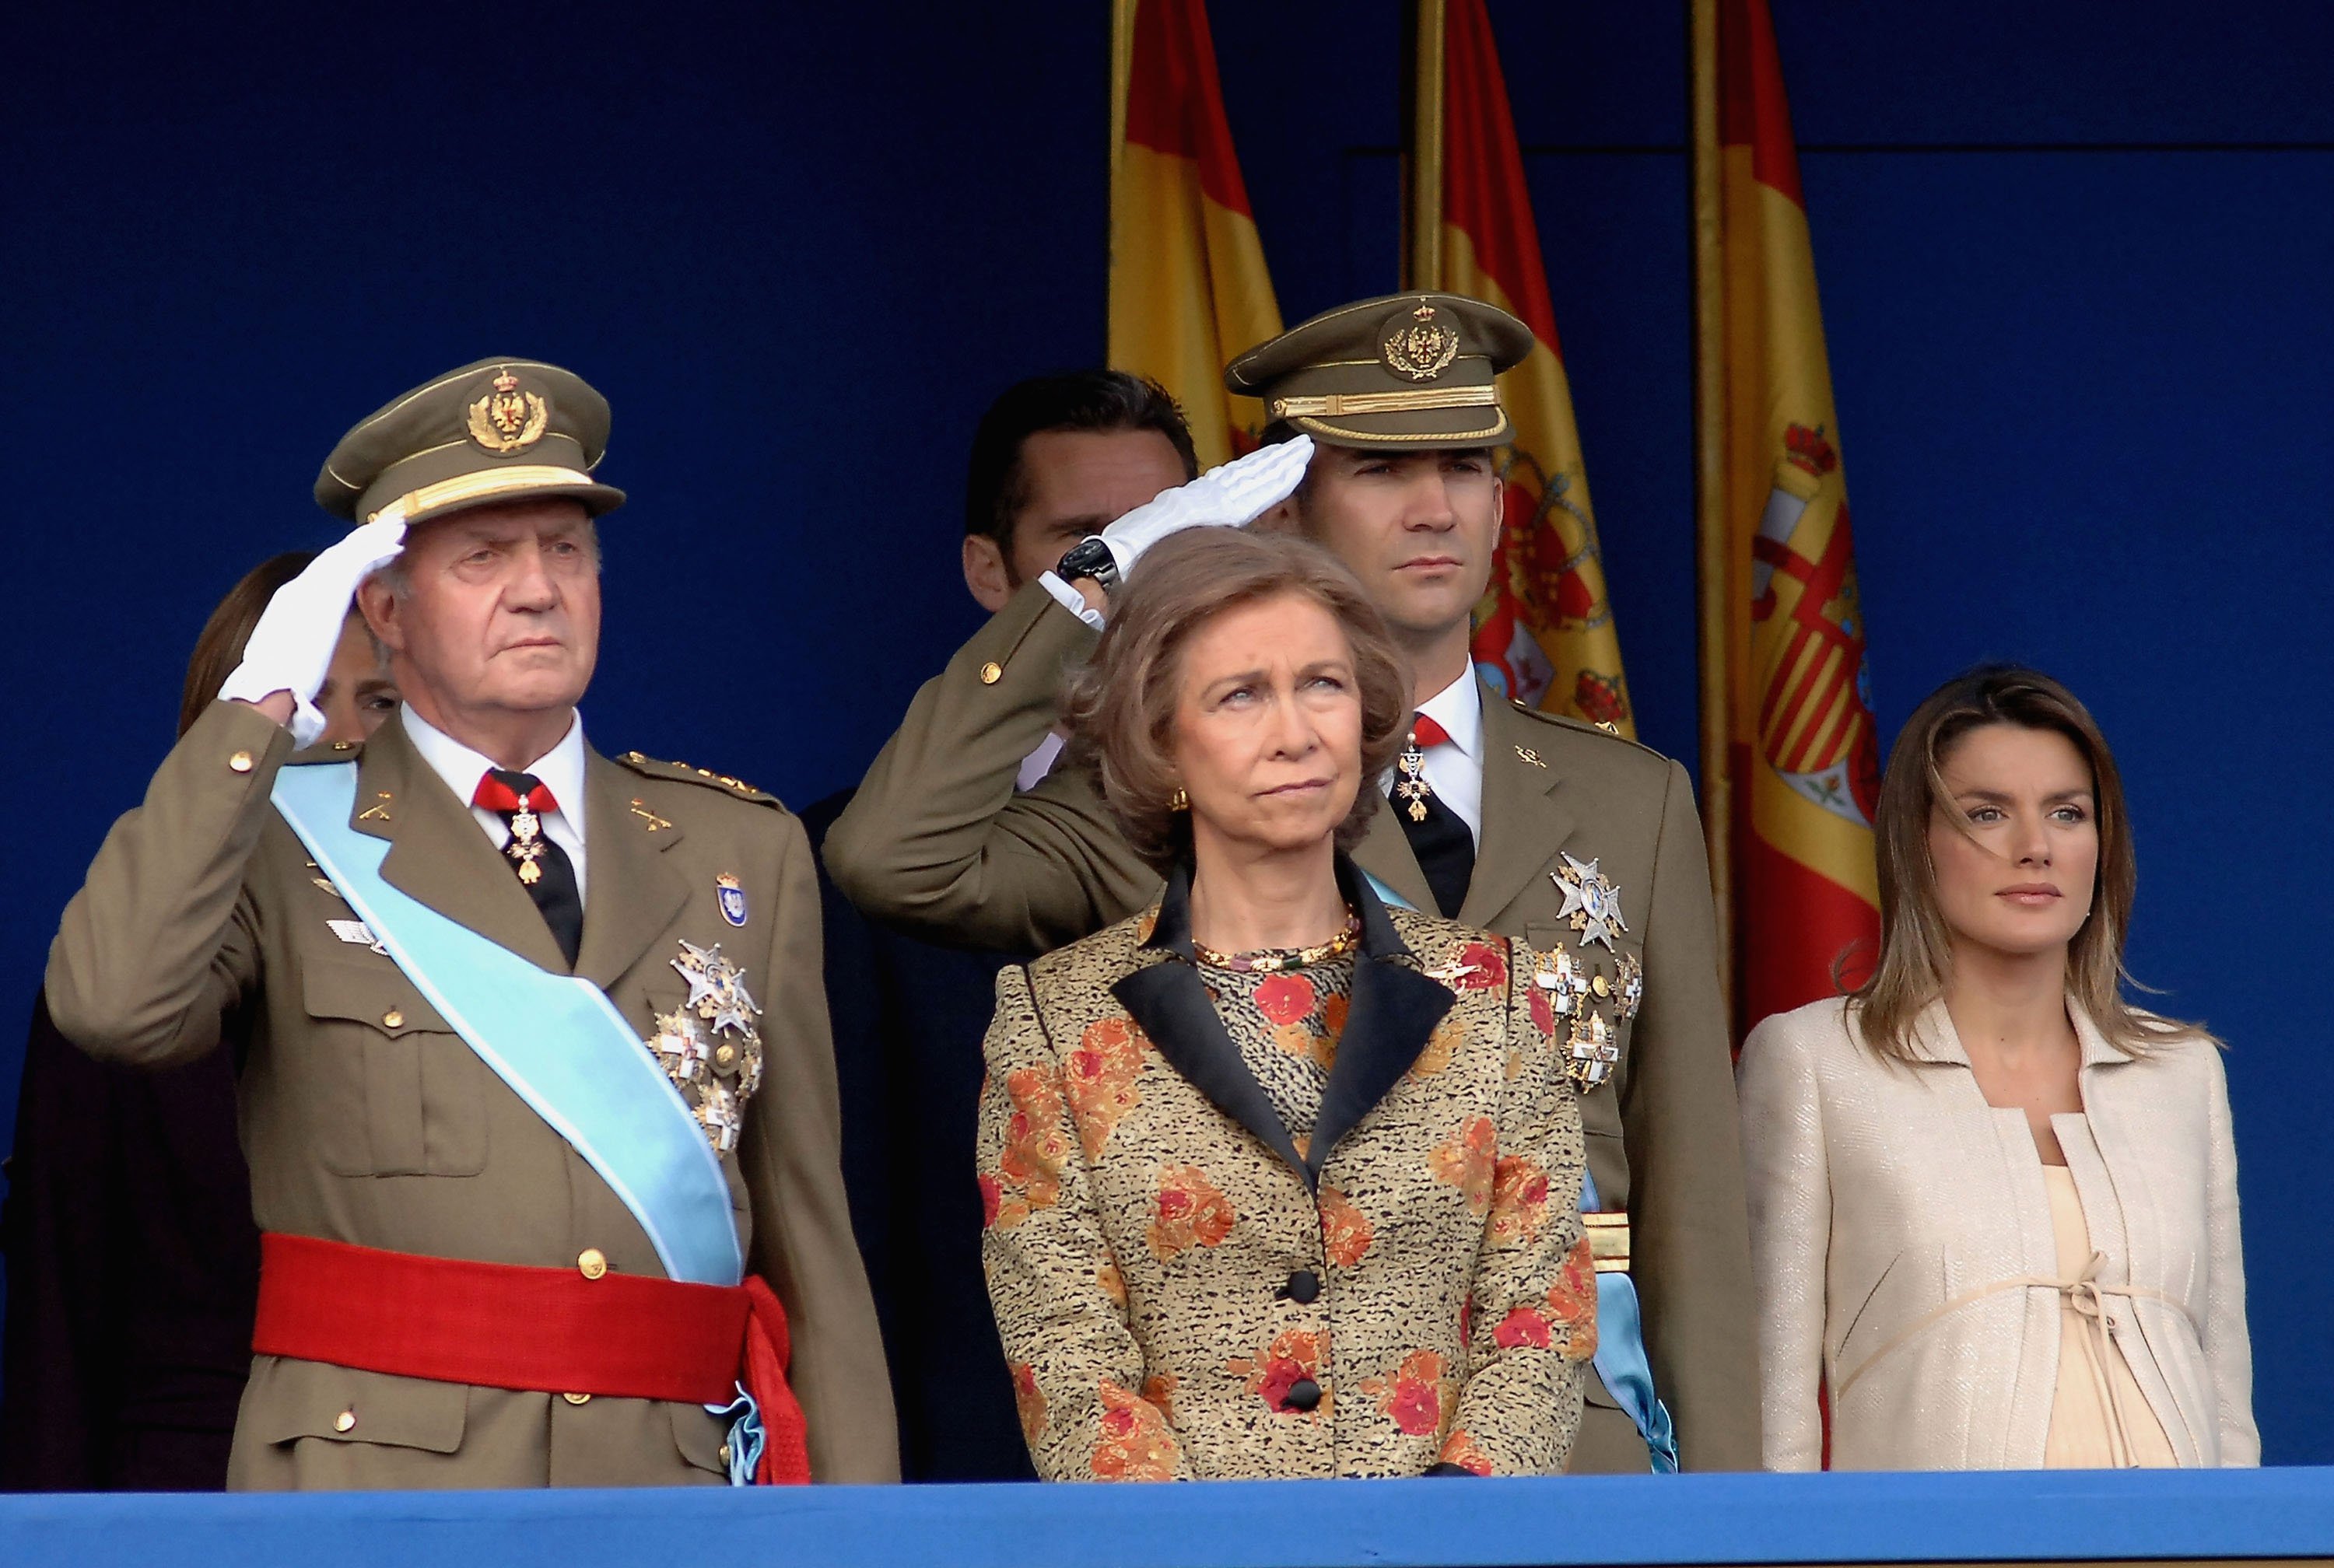 Spanish Royals King Juan Carlos, Queen Sofia, Crown Prince Felipe and Princess Letizia during Spain's National Day Military Parade in La Castellana Avenue on October 12, 2005 in Madrid, Spain. / Source: Getty Images